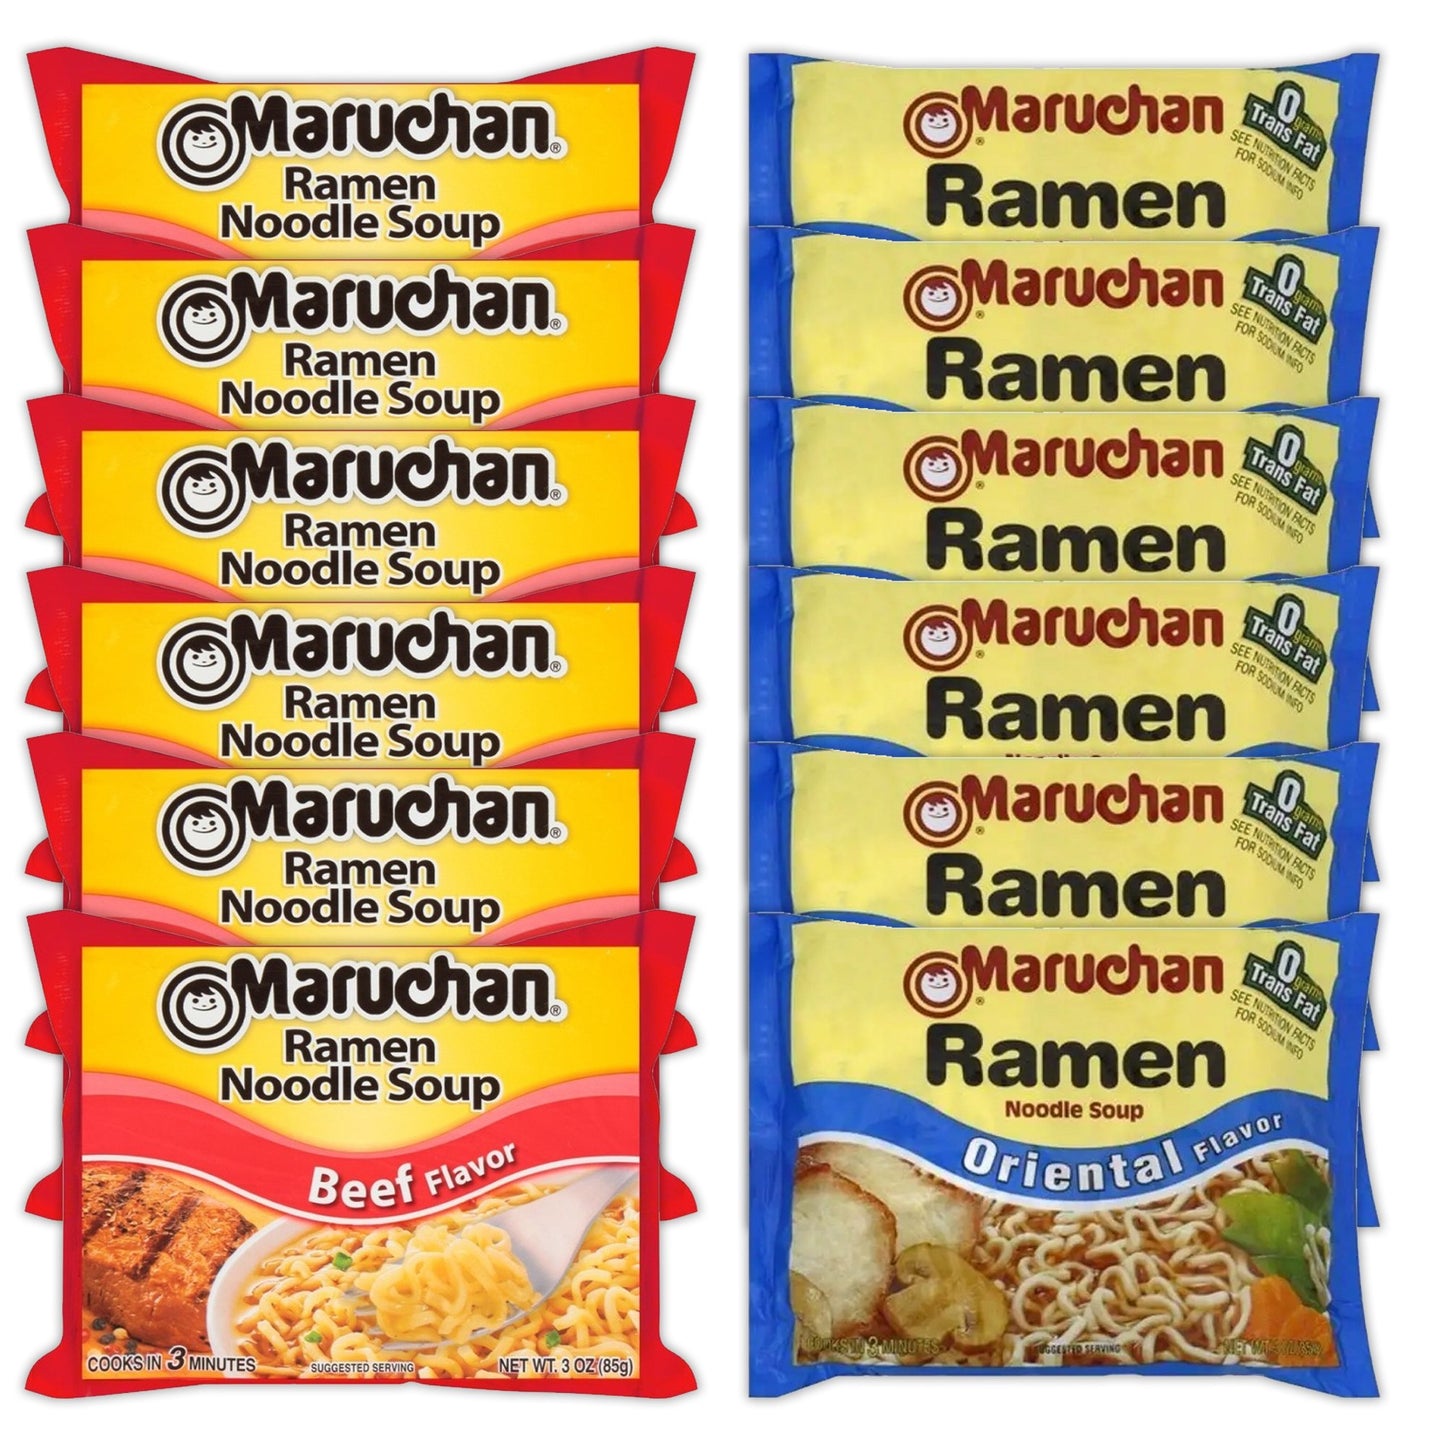 Maruchan Ramen Instant Noodle Soup Variety, 2 Flavors - 6 Packs Beef & 6 Packs Soy Sauce , 3 Ounce Single Servings Lunch / Dinner Variety